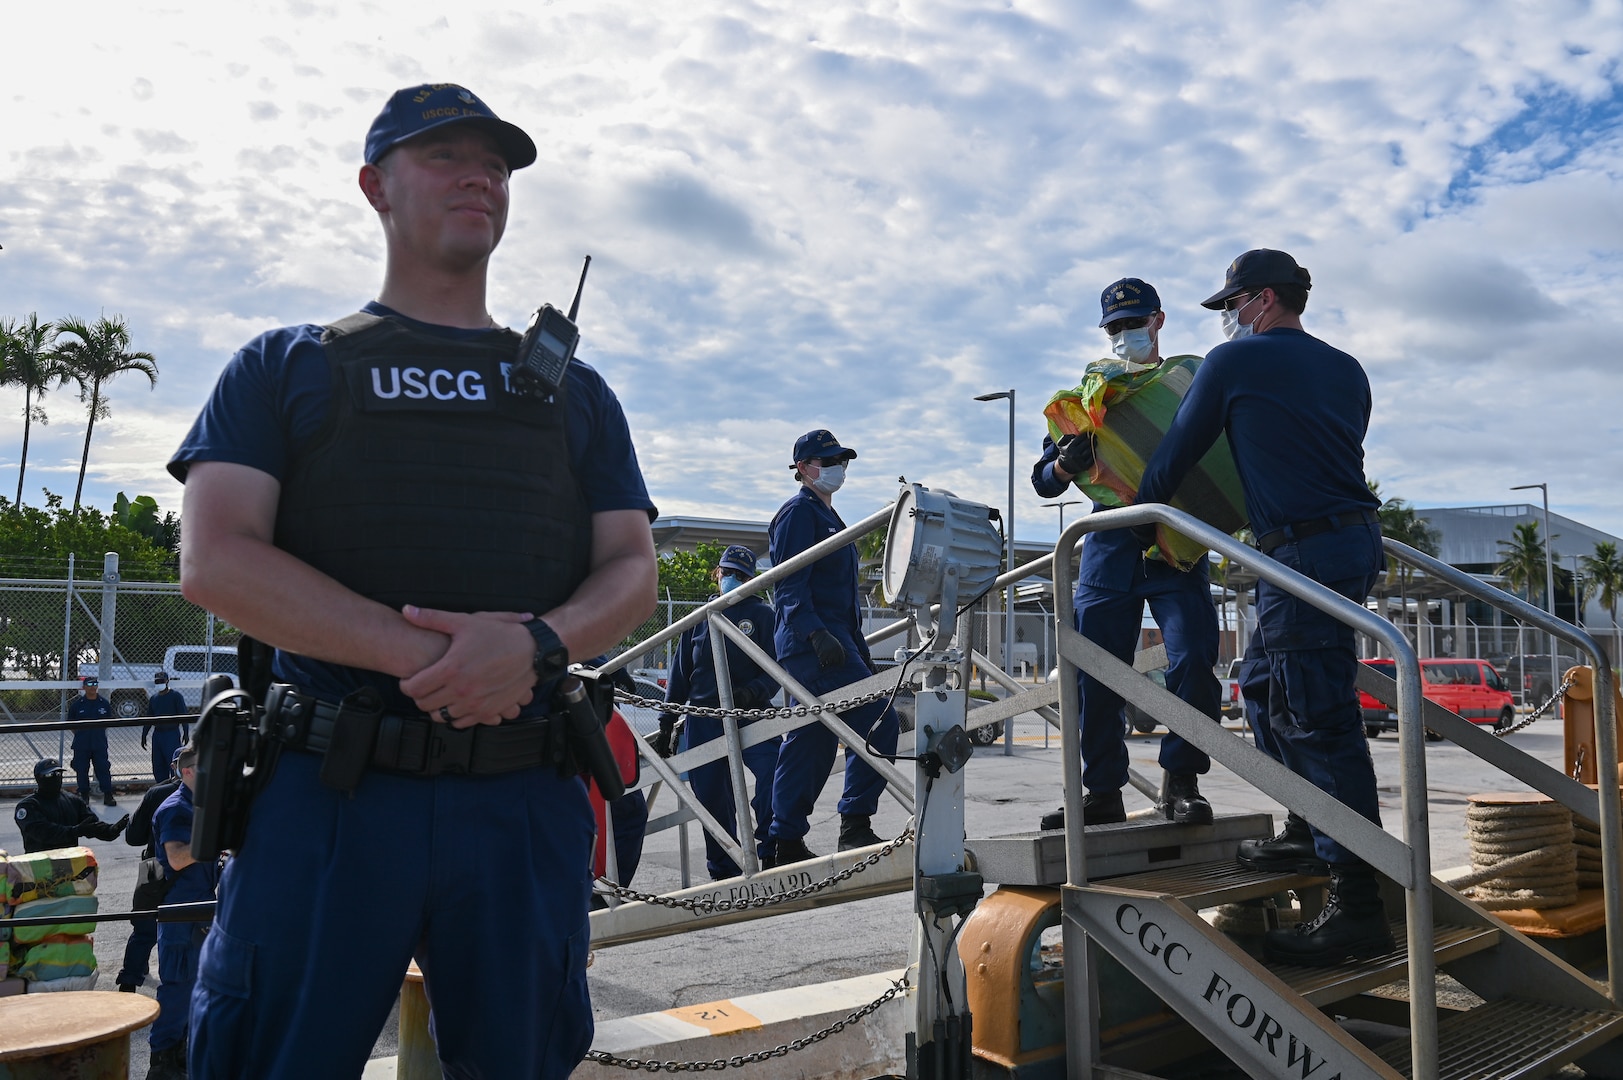 A crew member of the Coast Guard Cutter Forward standing watch over illegal narcotics, July 22, 2024, Port Everglades, Florida. Armed Coast Guardsmen stand watch over interdicted drugs to ensure security and accountability of seized contraband. (U.S. Coast Guard photo by Petty Officer 3rd Class Nicholas Strasburg)